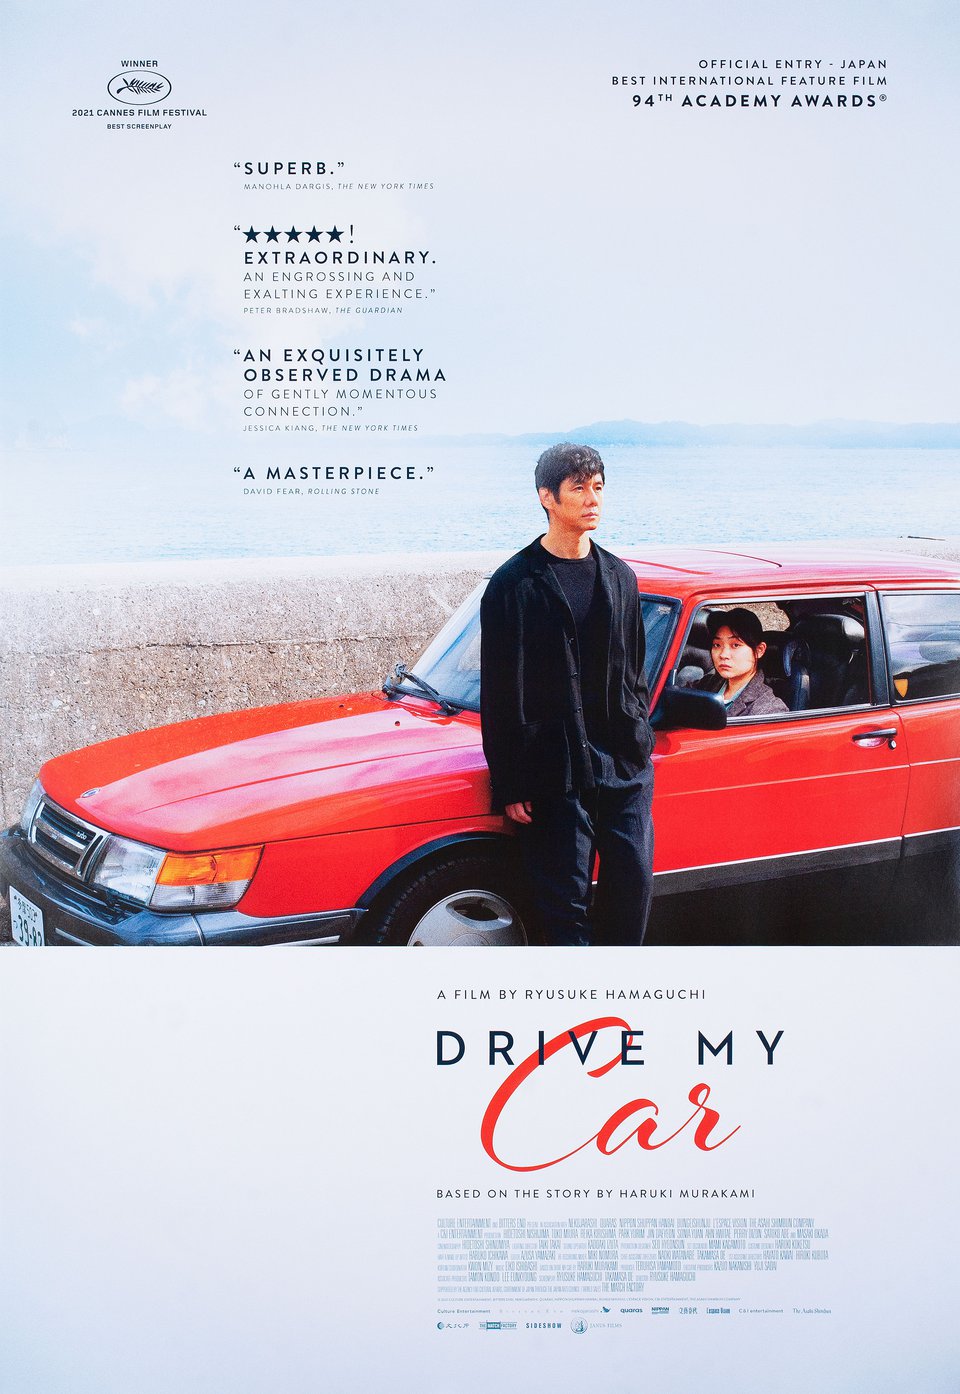 Drive My Car Movie Poster